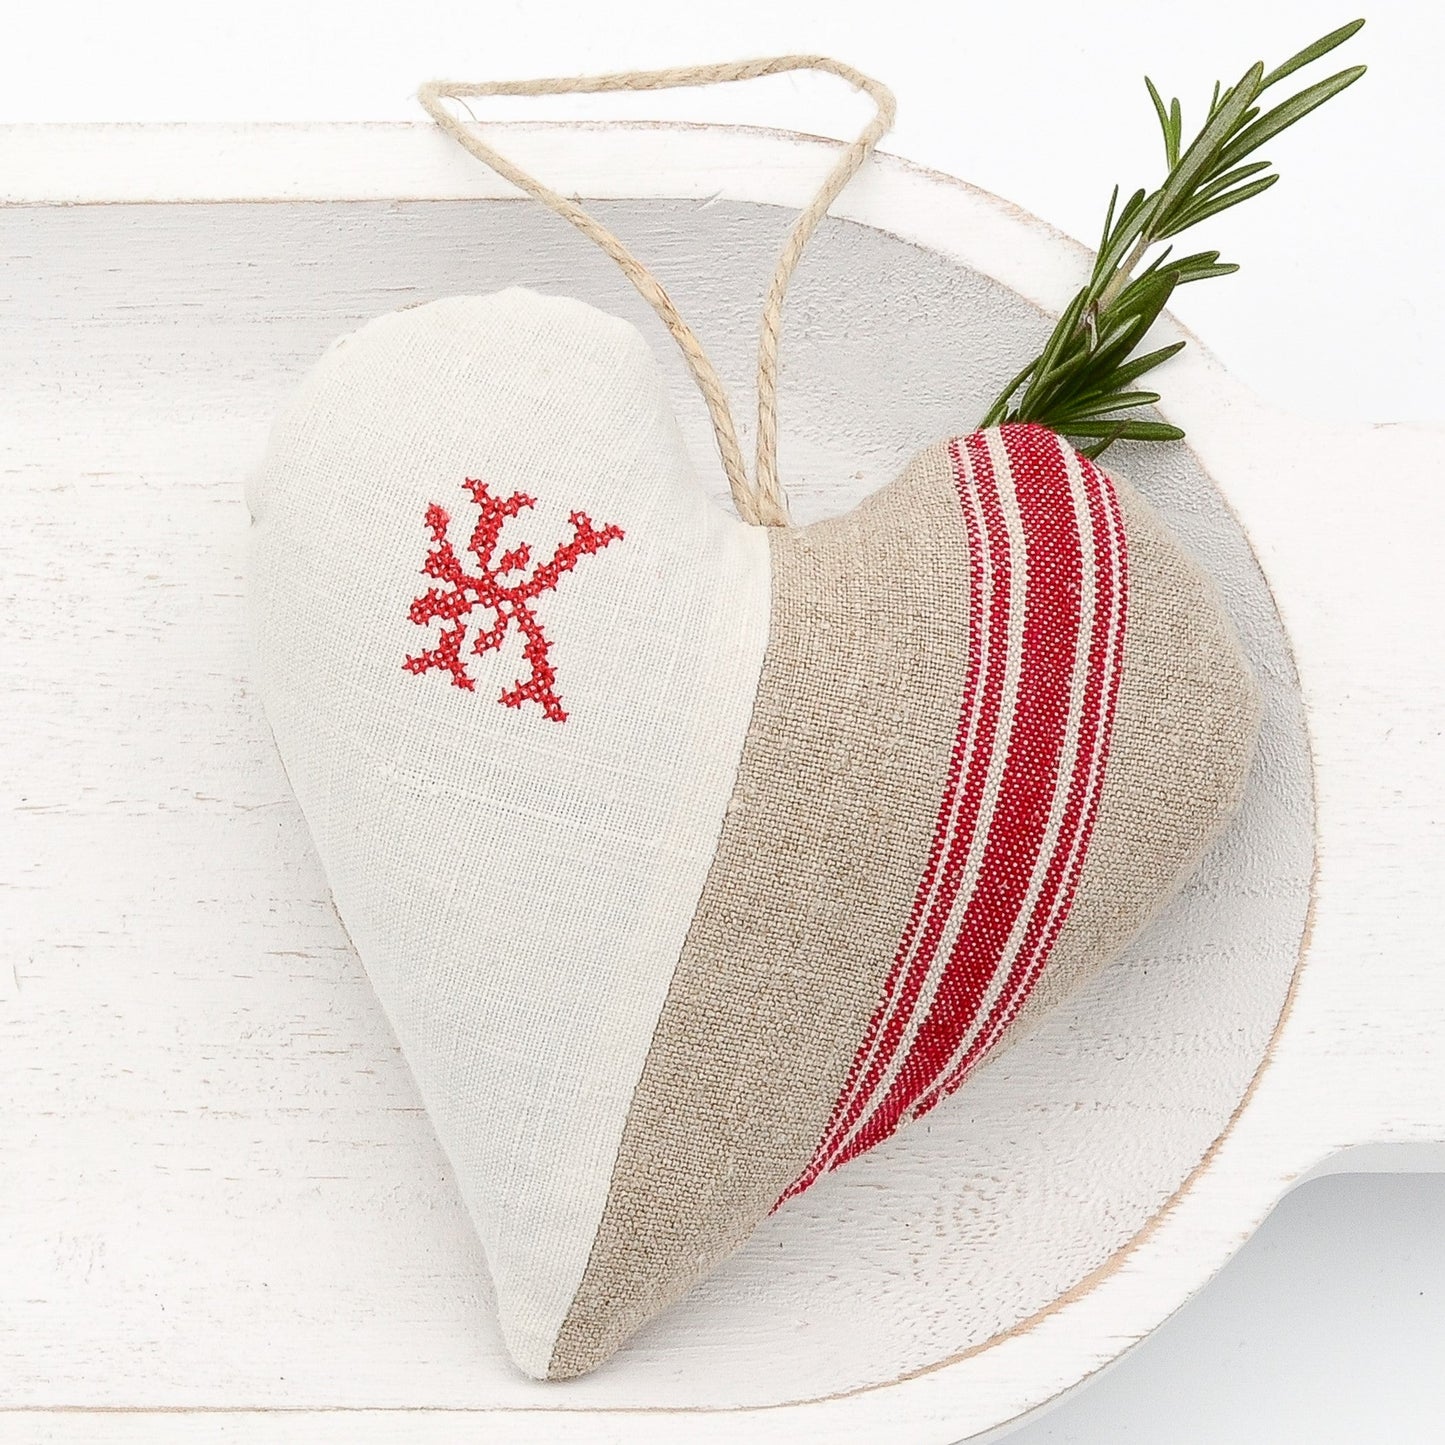 Antique European white linen and red-striped German mangle cloth natural tone linen lavender sachet heart, letter "K" monogram (all letters available) embroidered in red cross stitch, hemp twine tie, filled with high quality lavender from Provence France